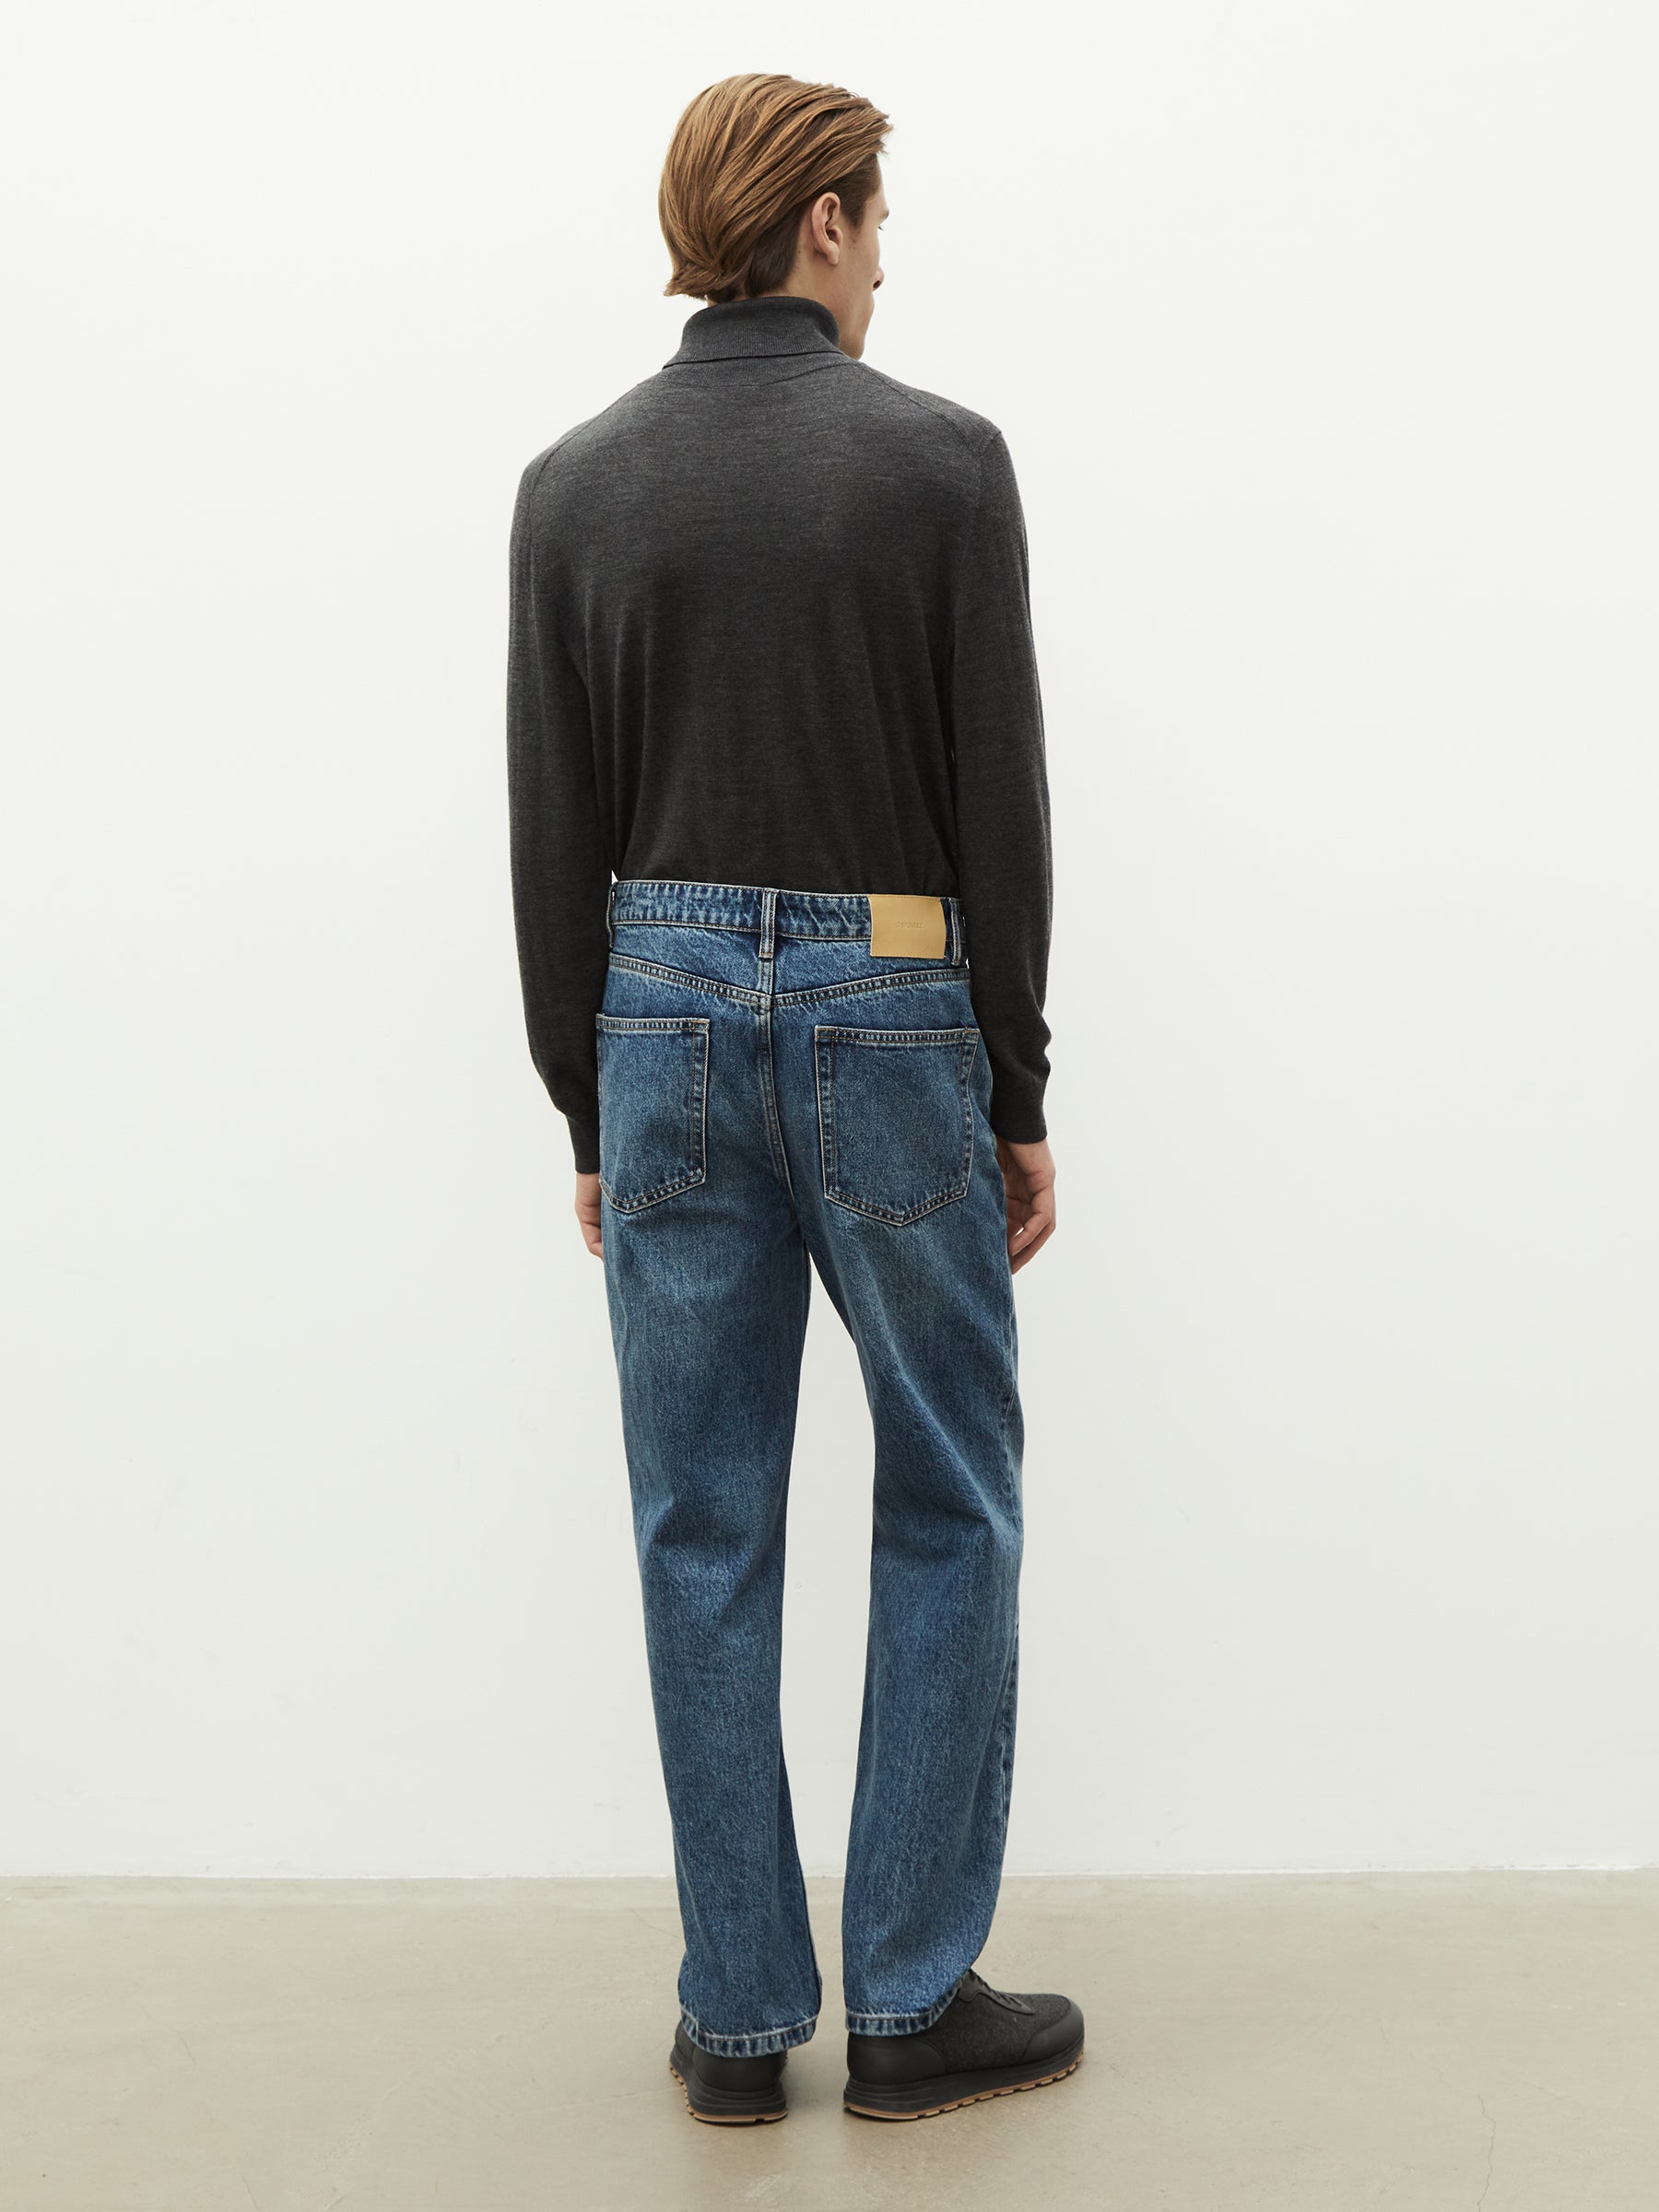 Tapered leg jeans 721